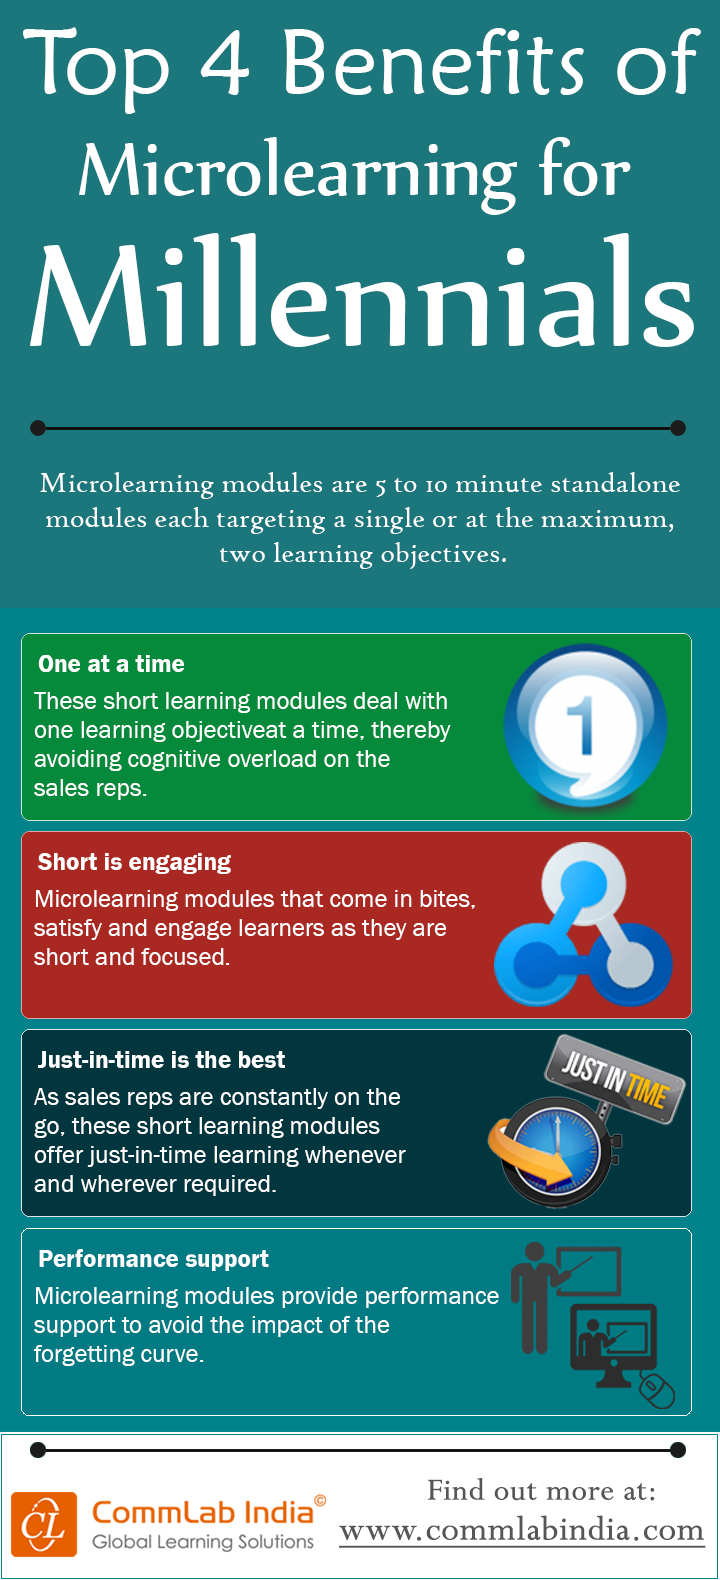 Top 4 Benefits of Microlearning for Millennials [Infographic]